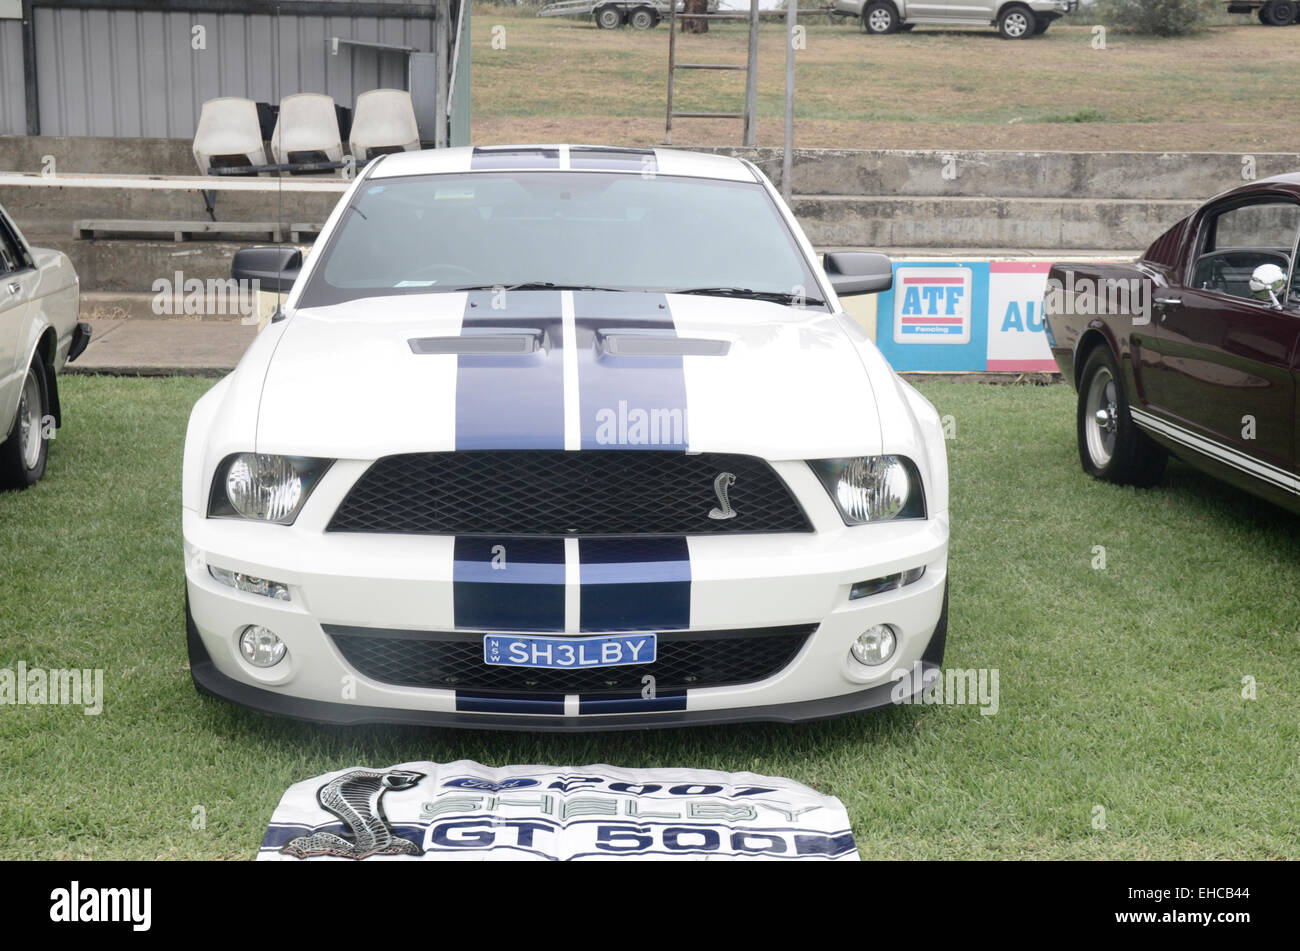 2007 Ford Mustang Shelby GT 500 on display Tamworth NSW Australia Stock Photo